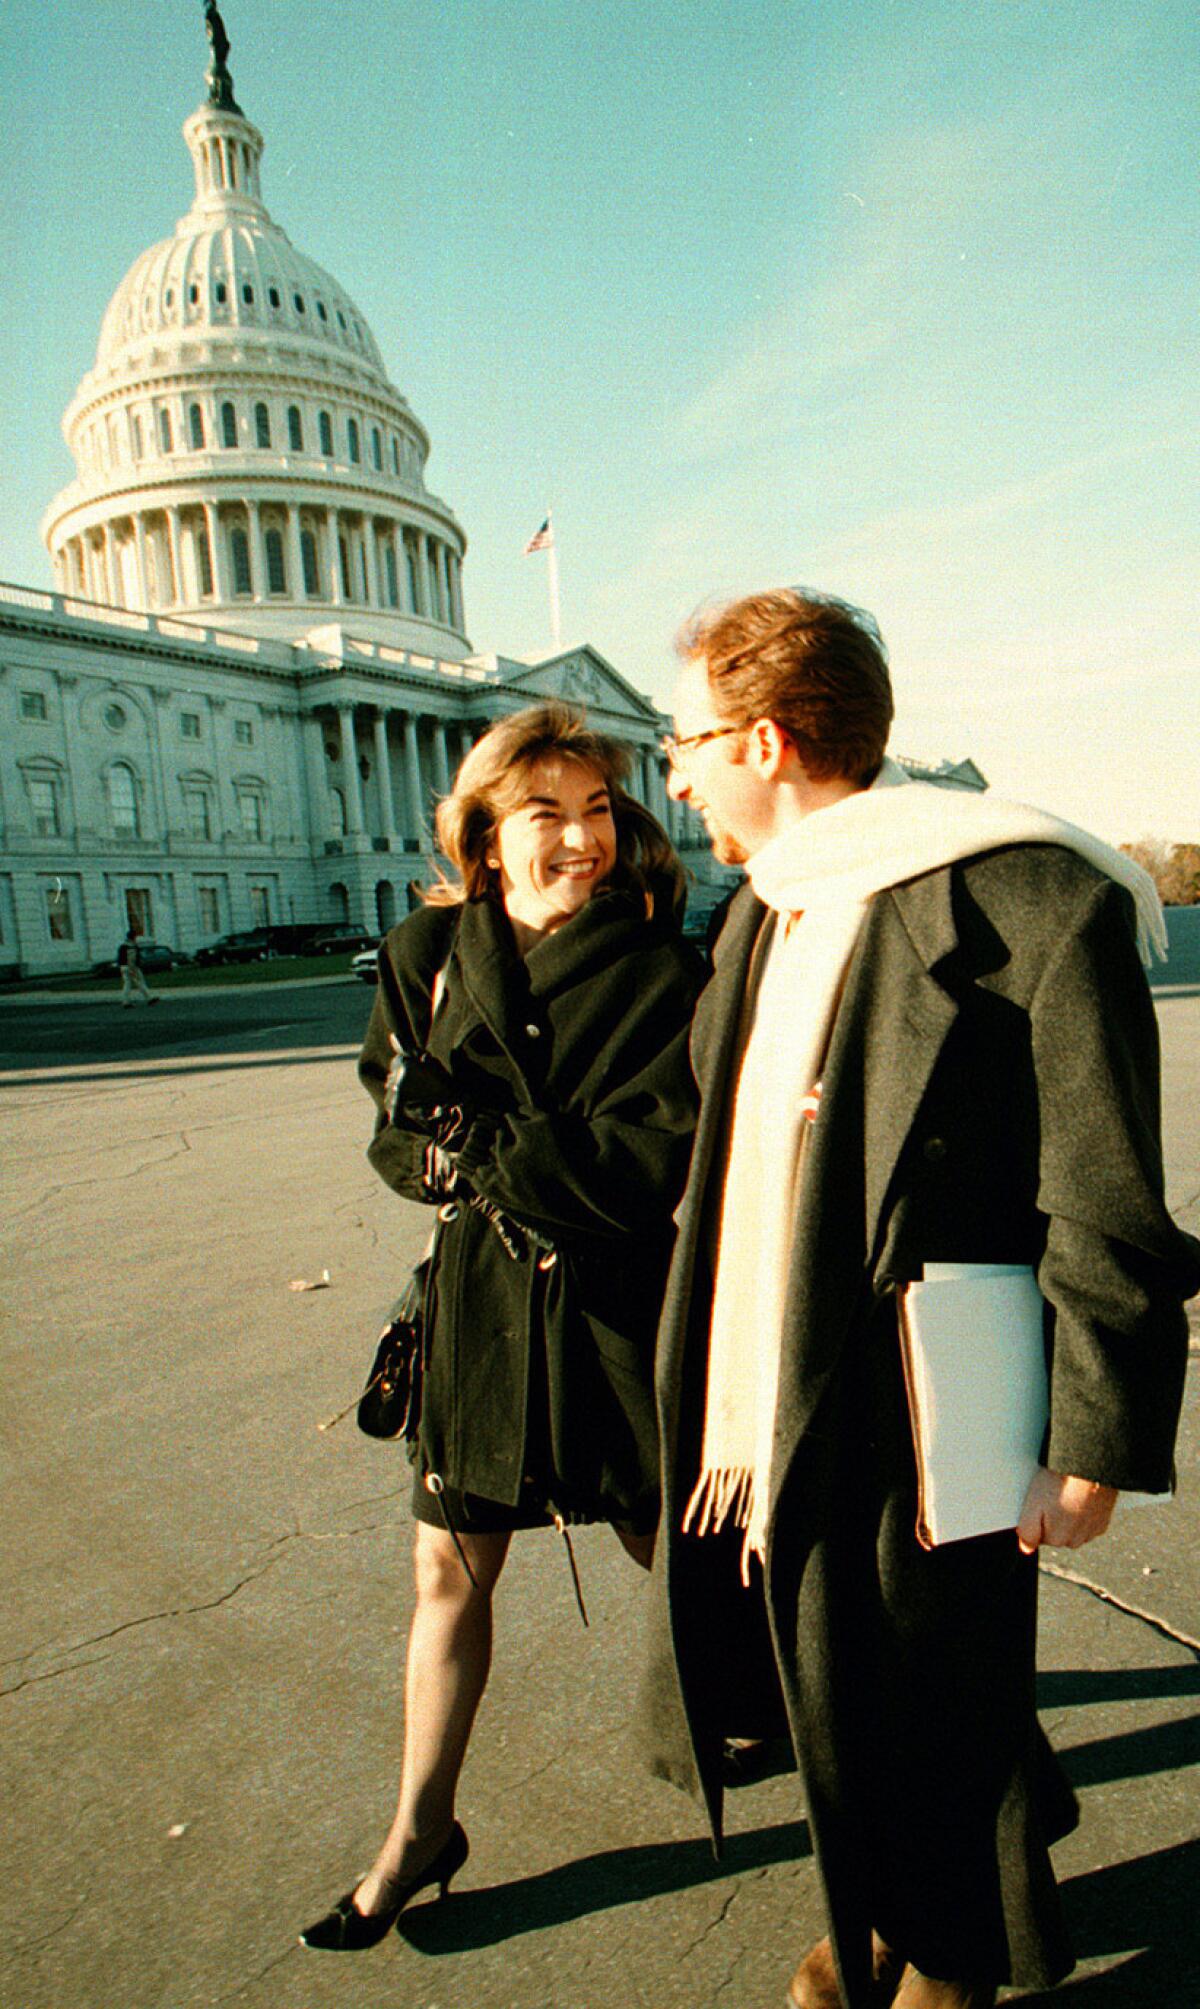 Loretta Sanchez, with her campaign manager John Shallman, arrives in Washington in 1996 for orientation sessions for new members of Congress. (Alex Garcia / Los Angeles Times)